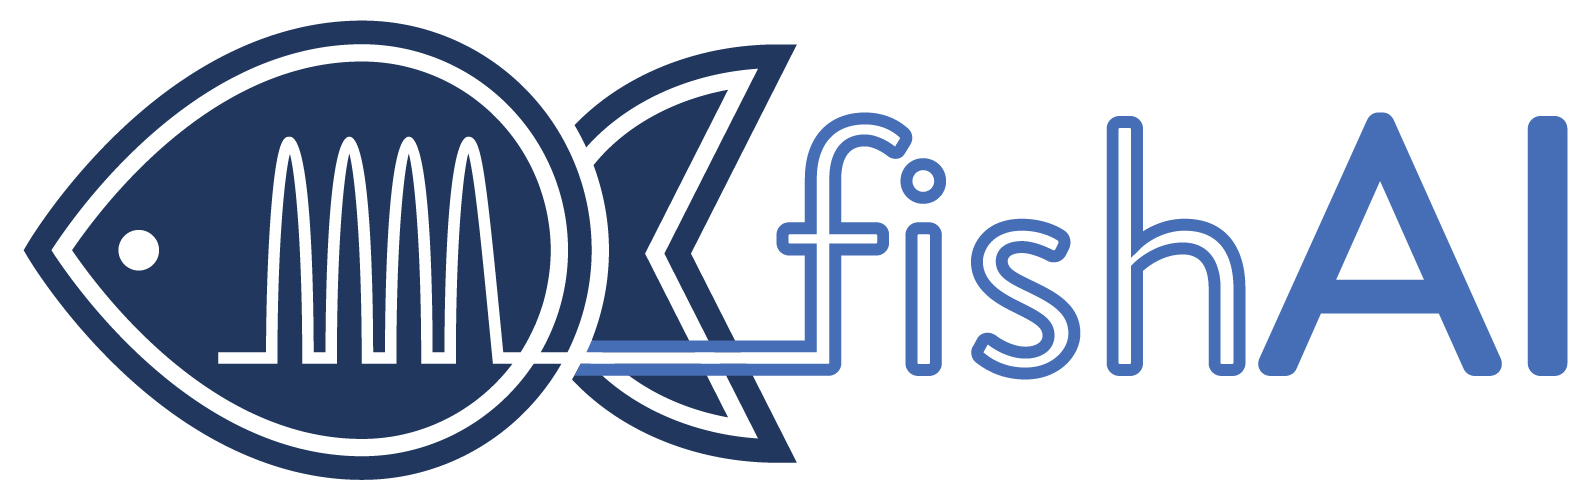 FISH-AI H2020 FETOPEN research project logo